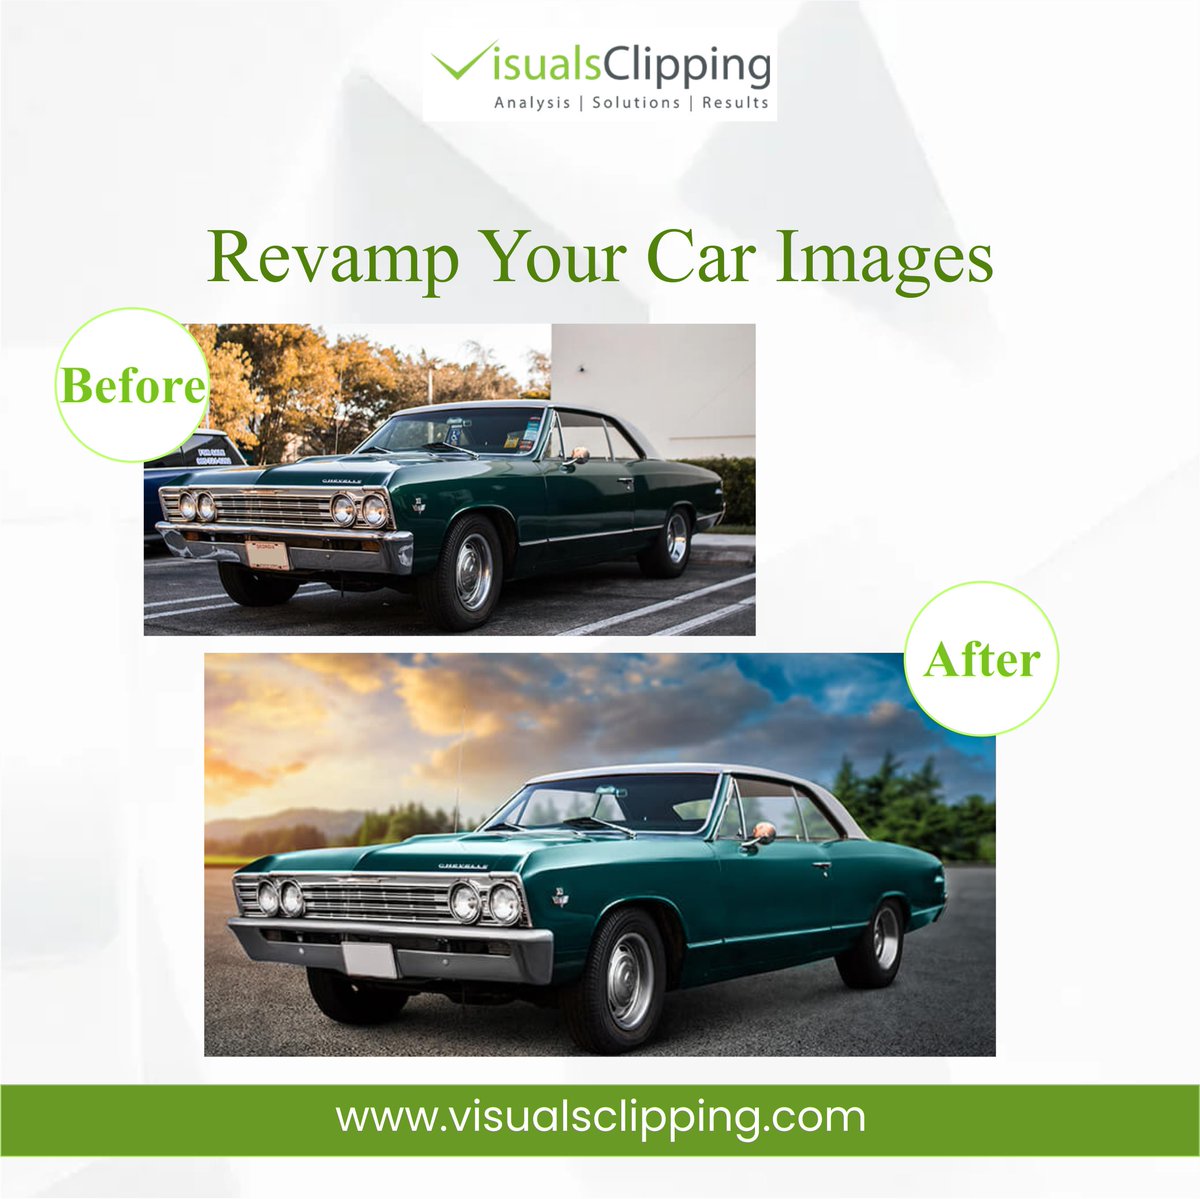 Give your #usedcarimages a new lease of life with our used car #retouchingservice. We can remove scratches, dents, and other imperfections to make your car look its best. We can also enhance the color and lighting to give it a showroom-ready finish.

#VisualsClipping #USA